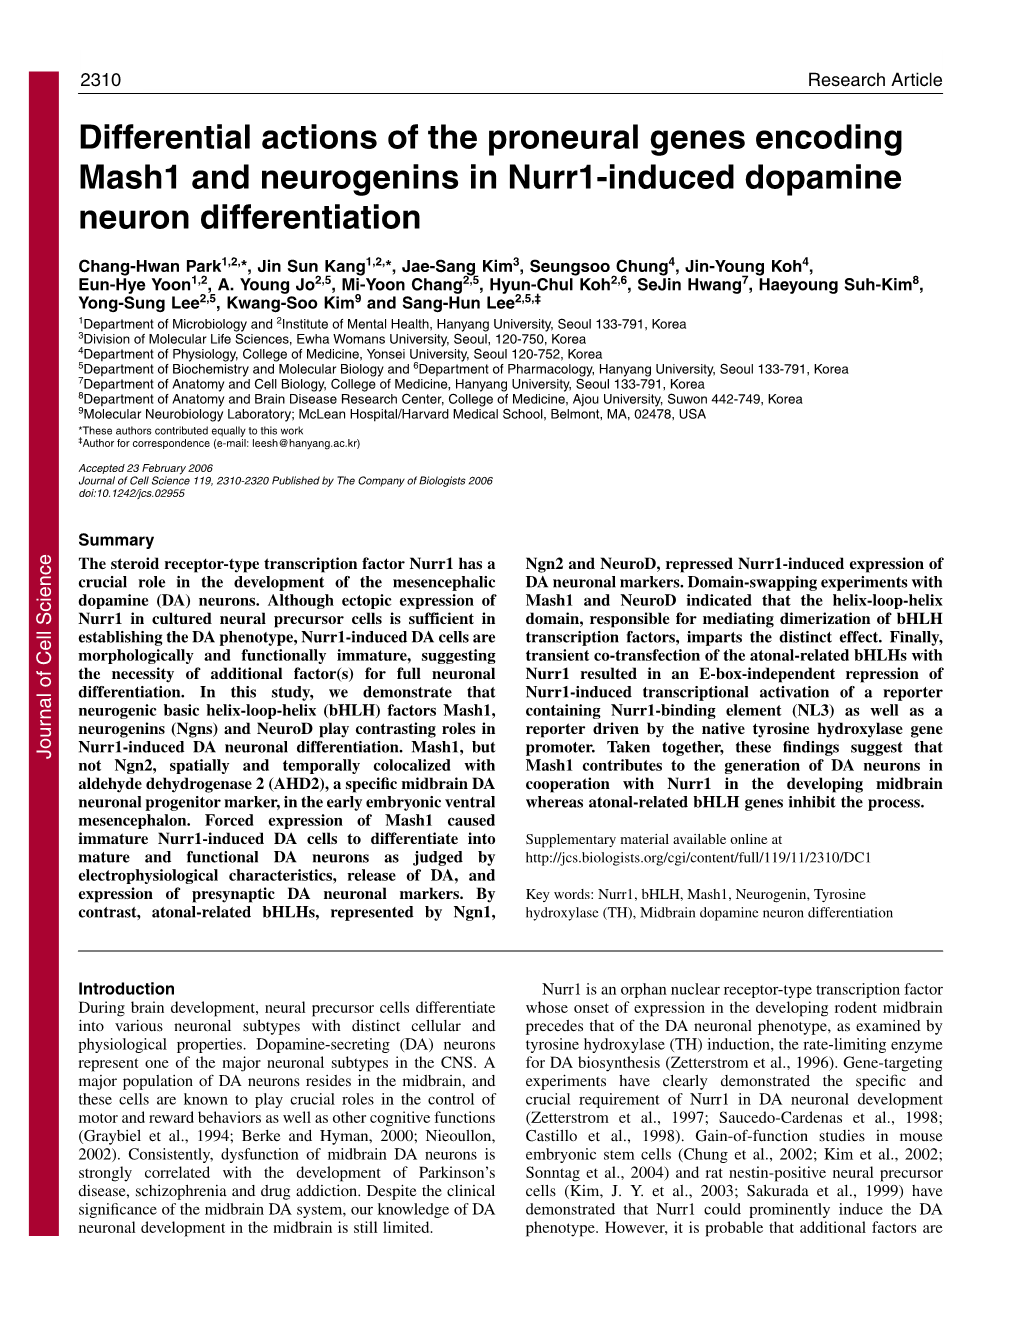 Differential Actions of the Proneural Genes Encoding Mash1 and Neurogenins in Nurr1-Induced Dopamine Neuron Differentiation